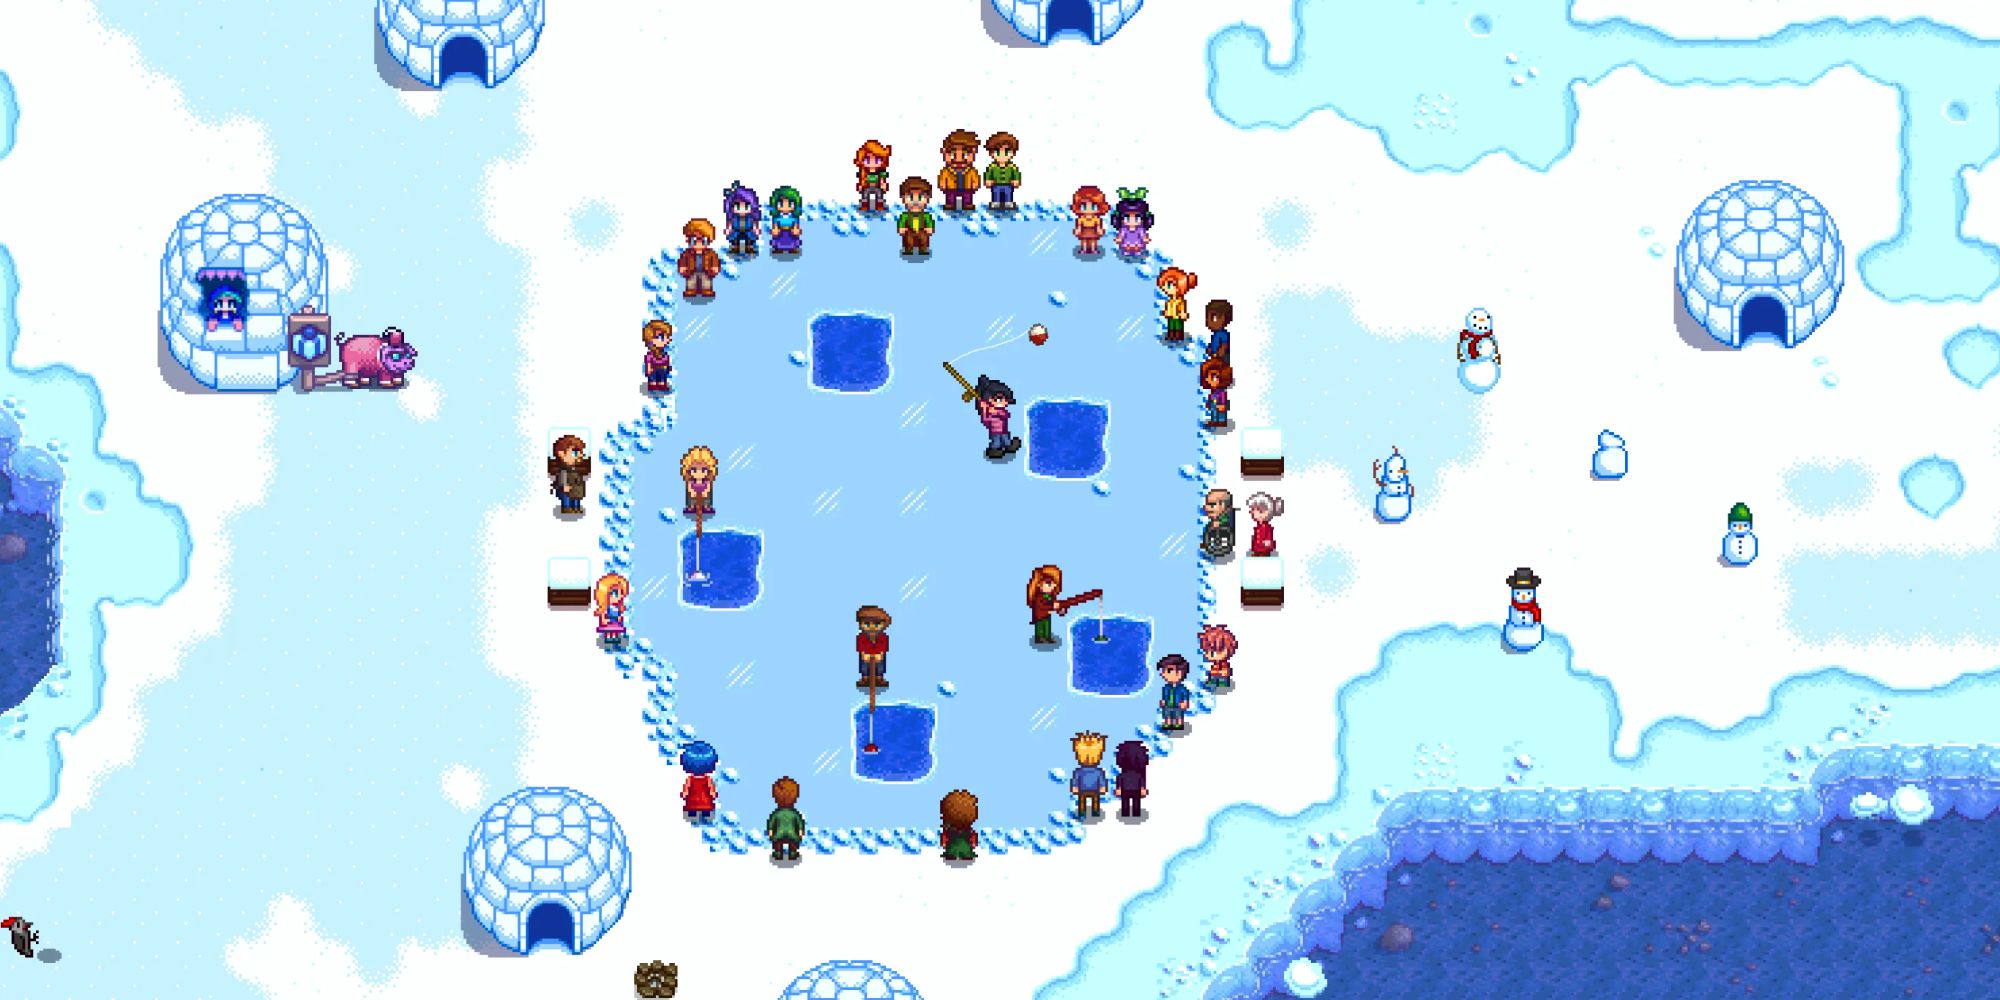 An image from Stardew Valley of the Festival Of Ice, where you can ice fish and purchase winter items in a shop.